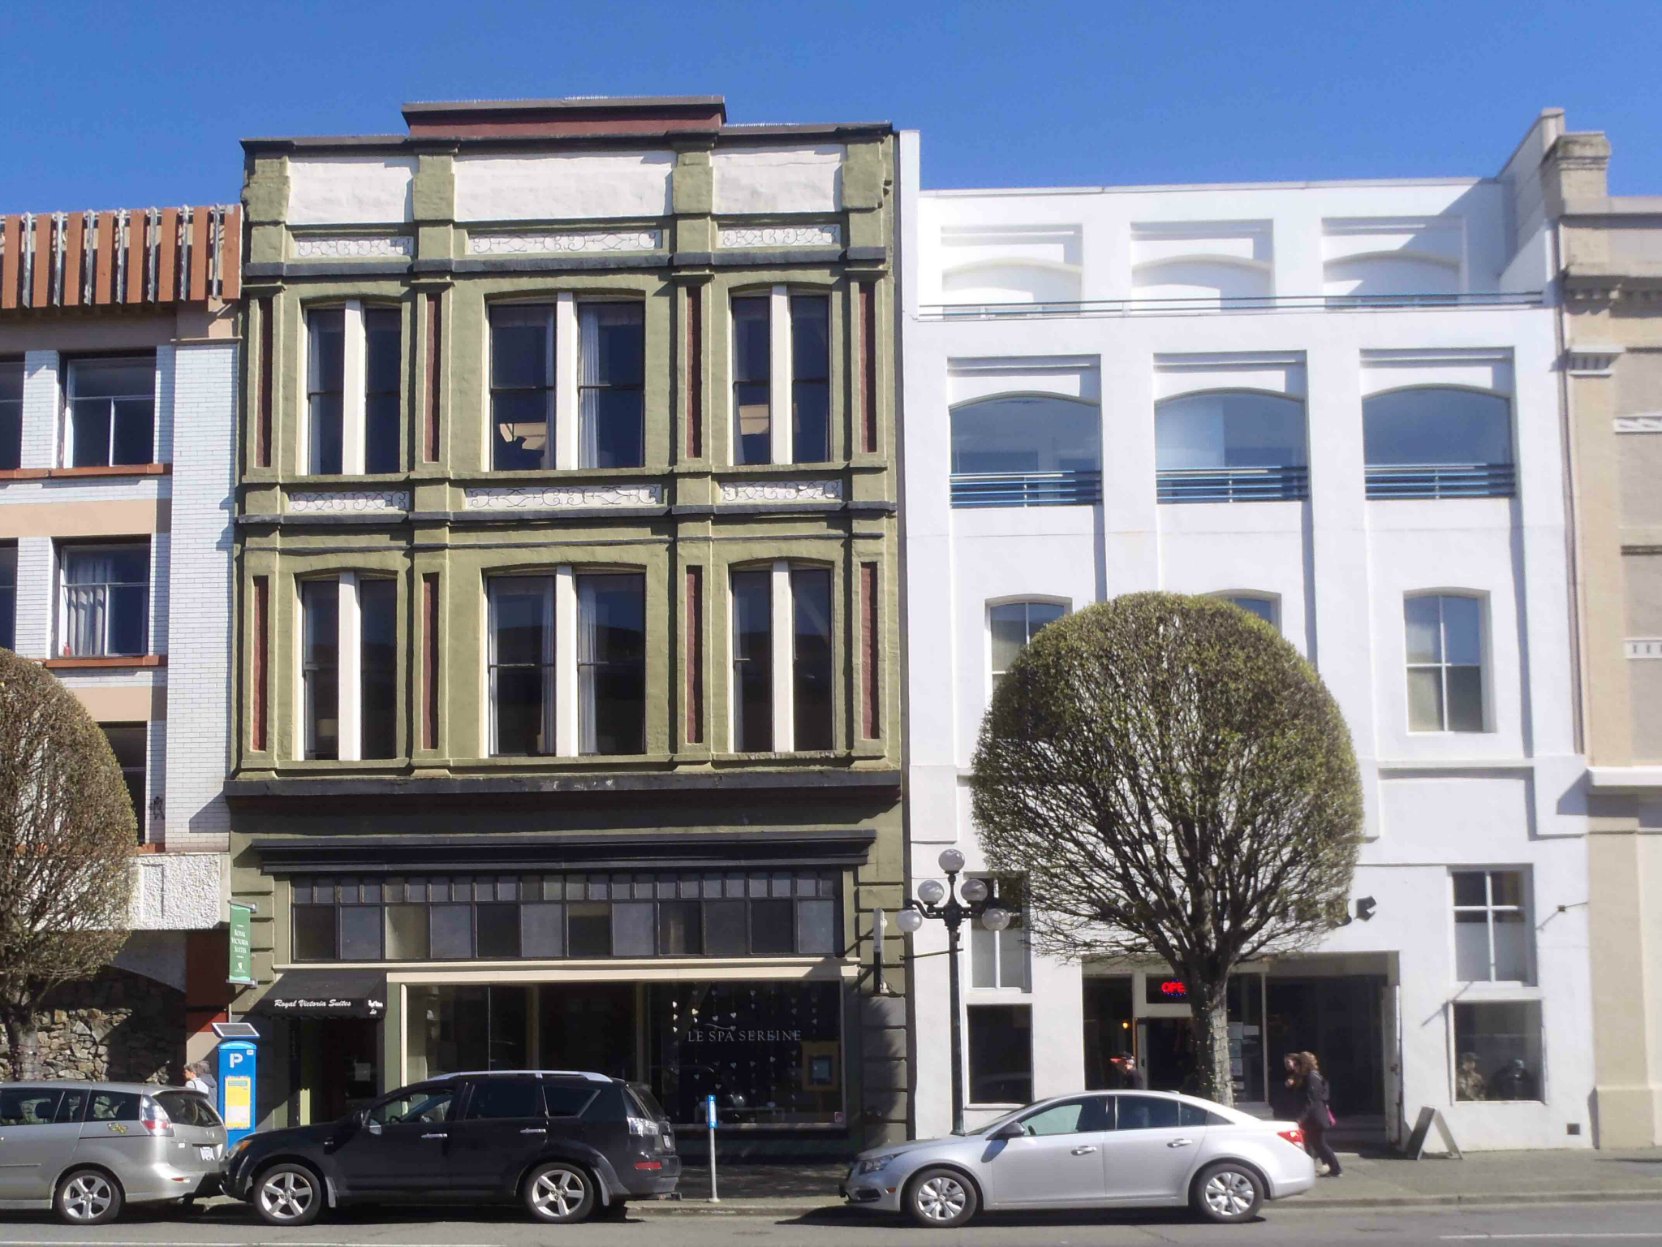 1407 Government Street (right), built in 1889, and 1411 Government Street (left), built in 1891.